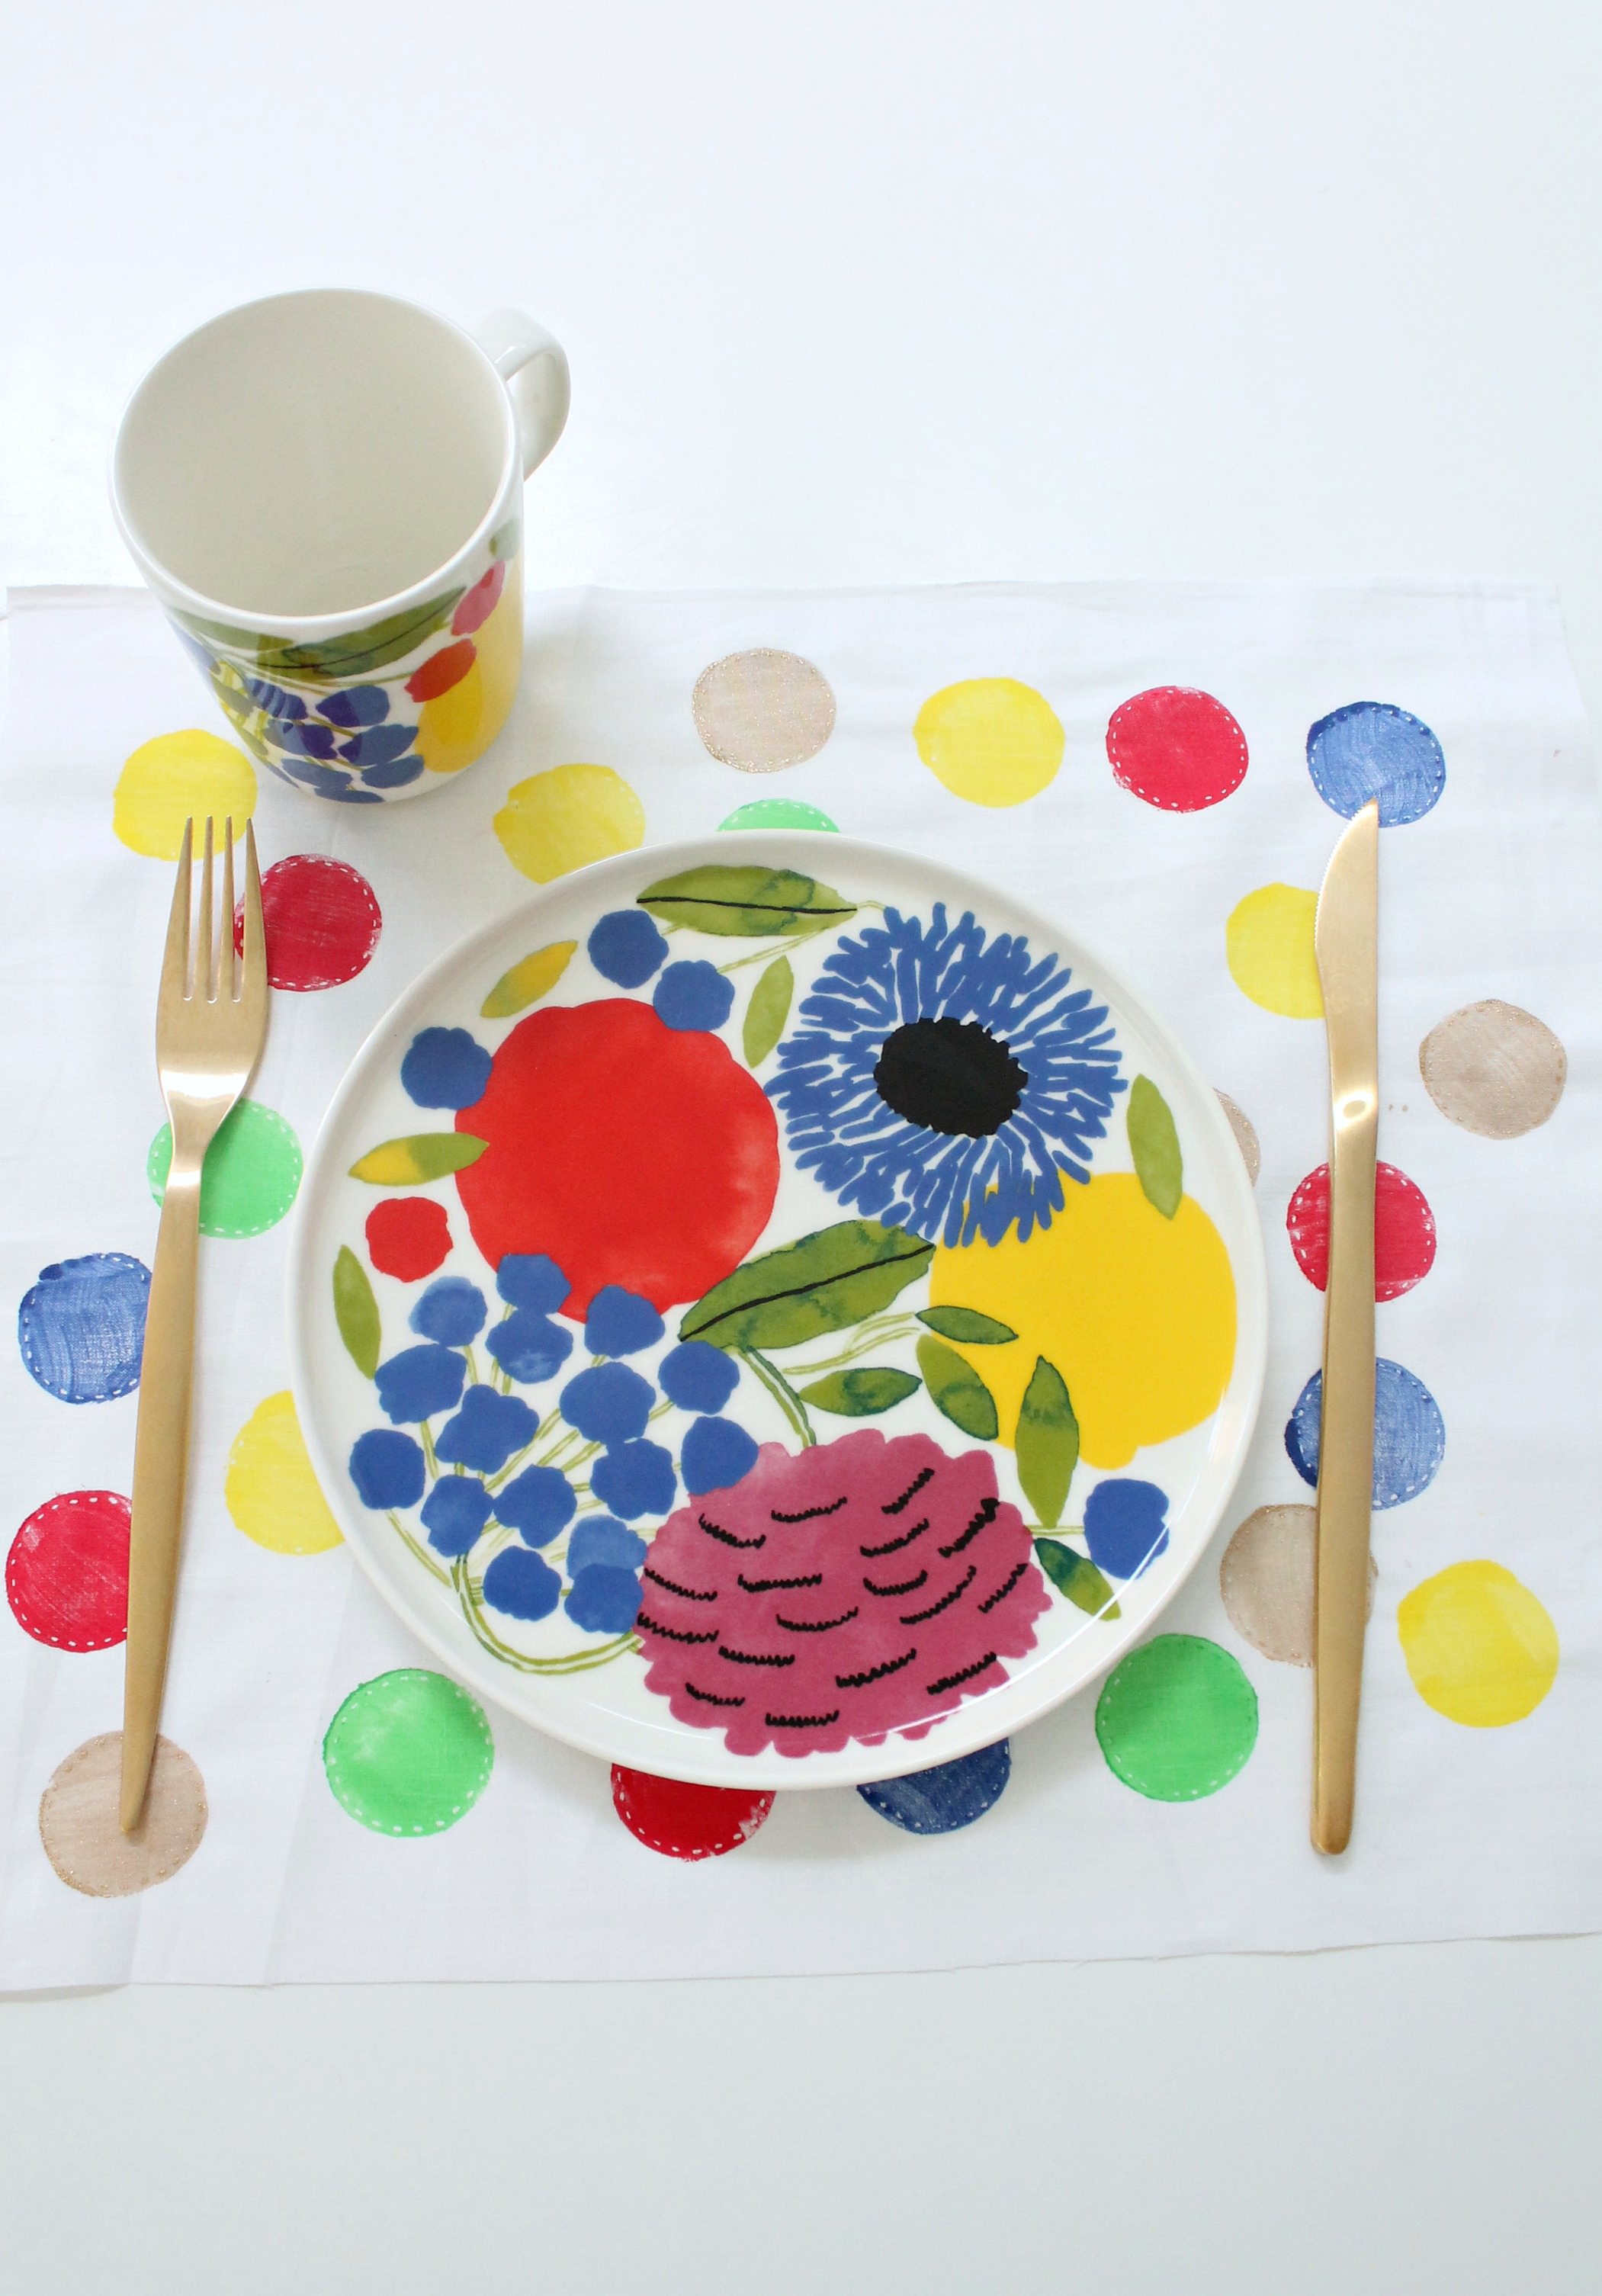 Fabric-paint-placemat-Little-Big-Bell